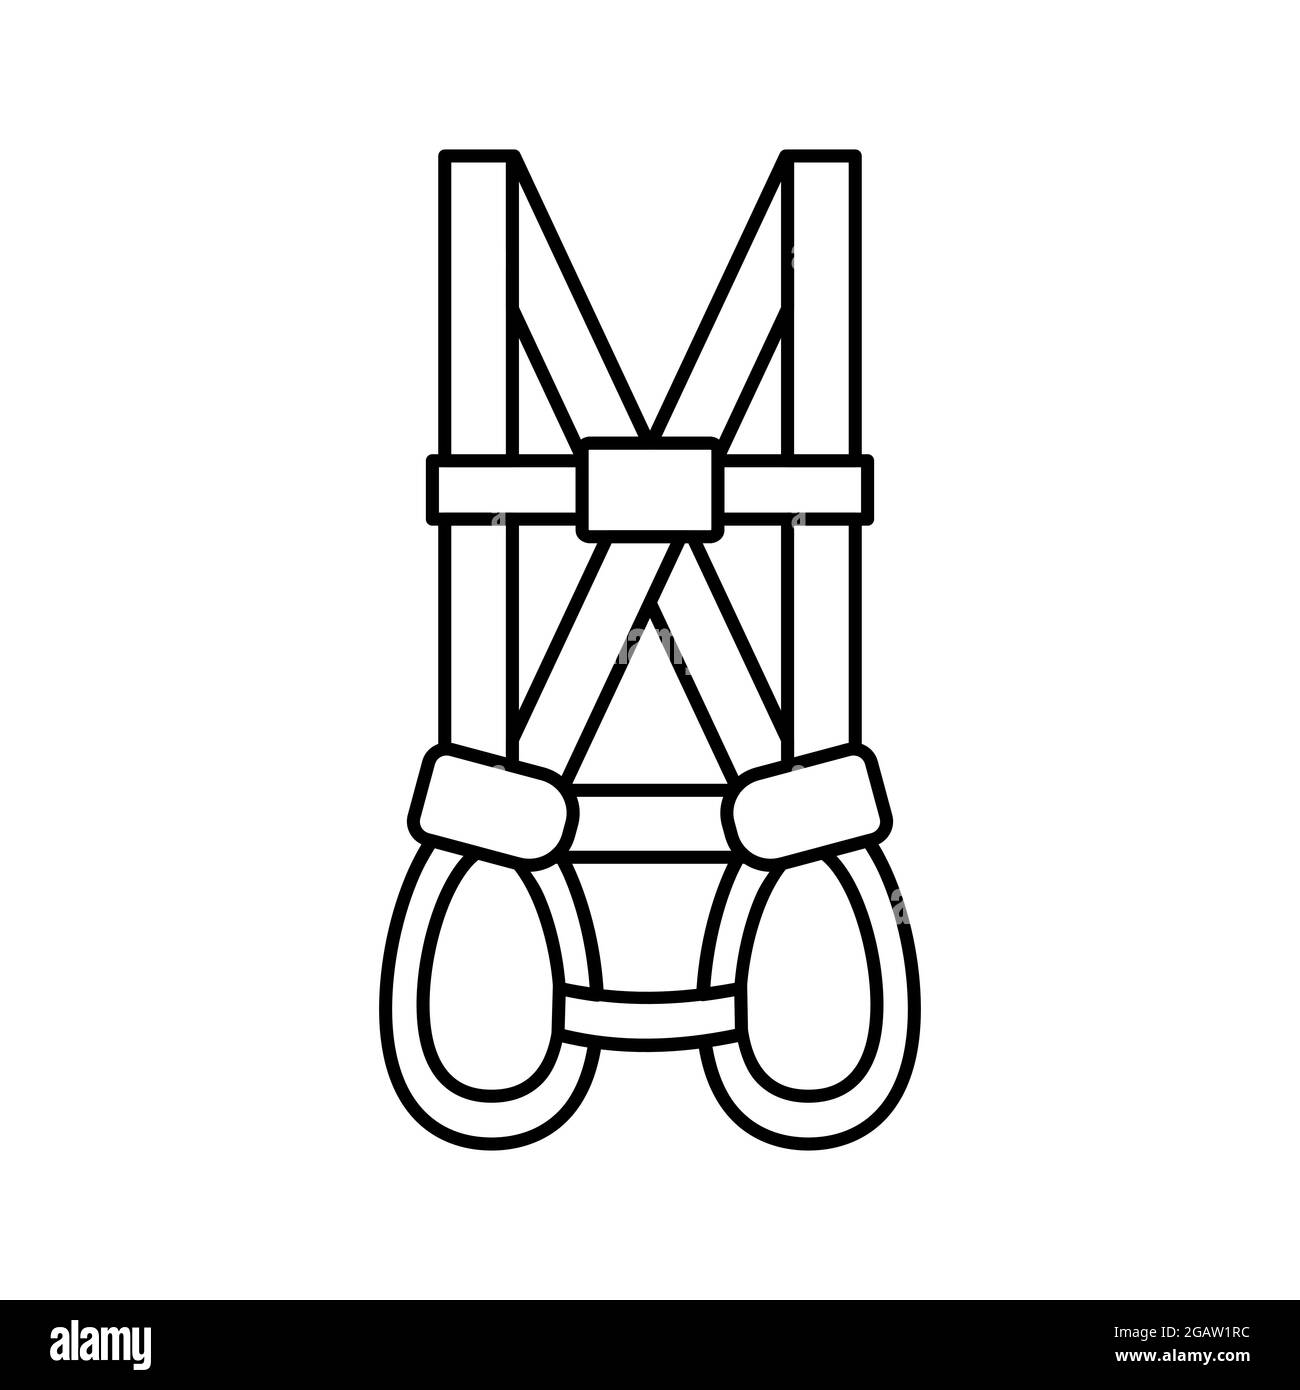 A full body harness line icon. Personal protection equipment. Height worker safety gear. Construction industry protective workwear. Vector clip art Stock Vector